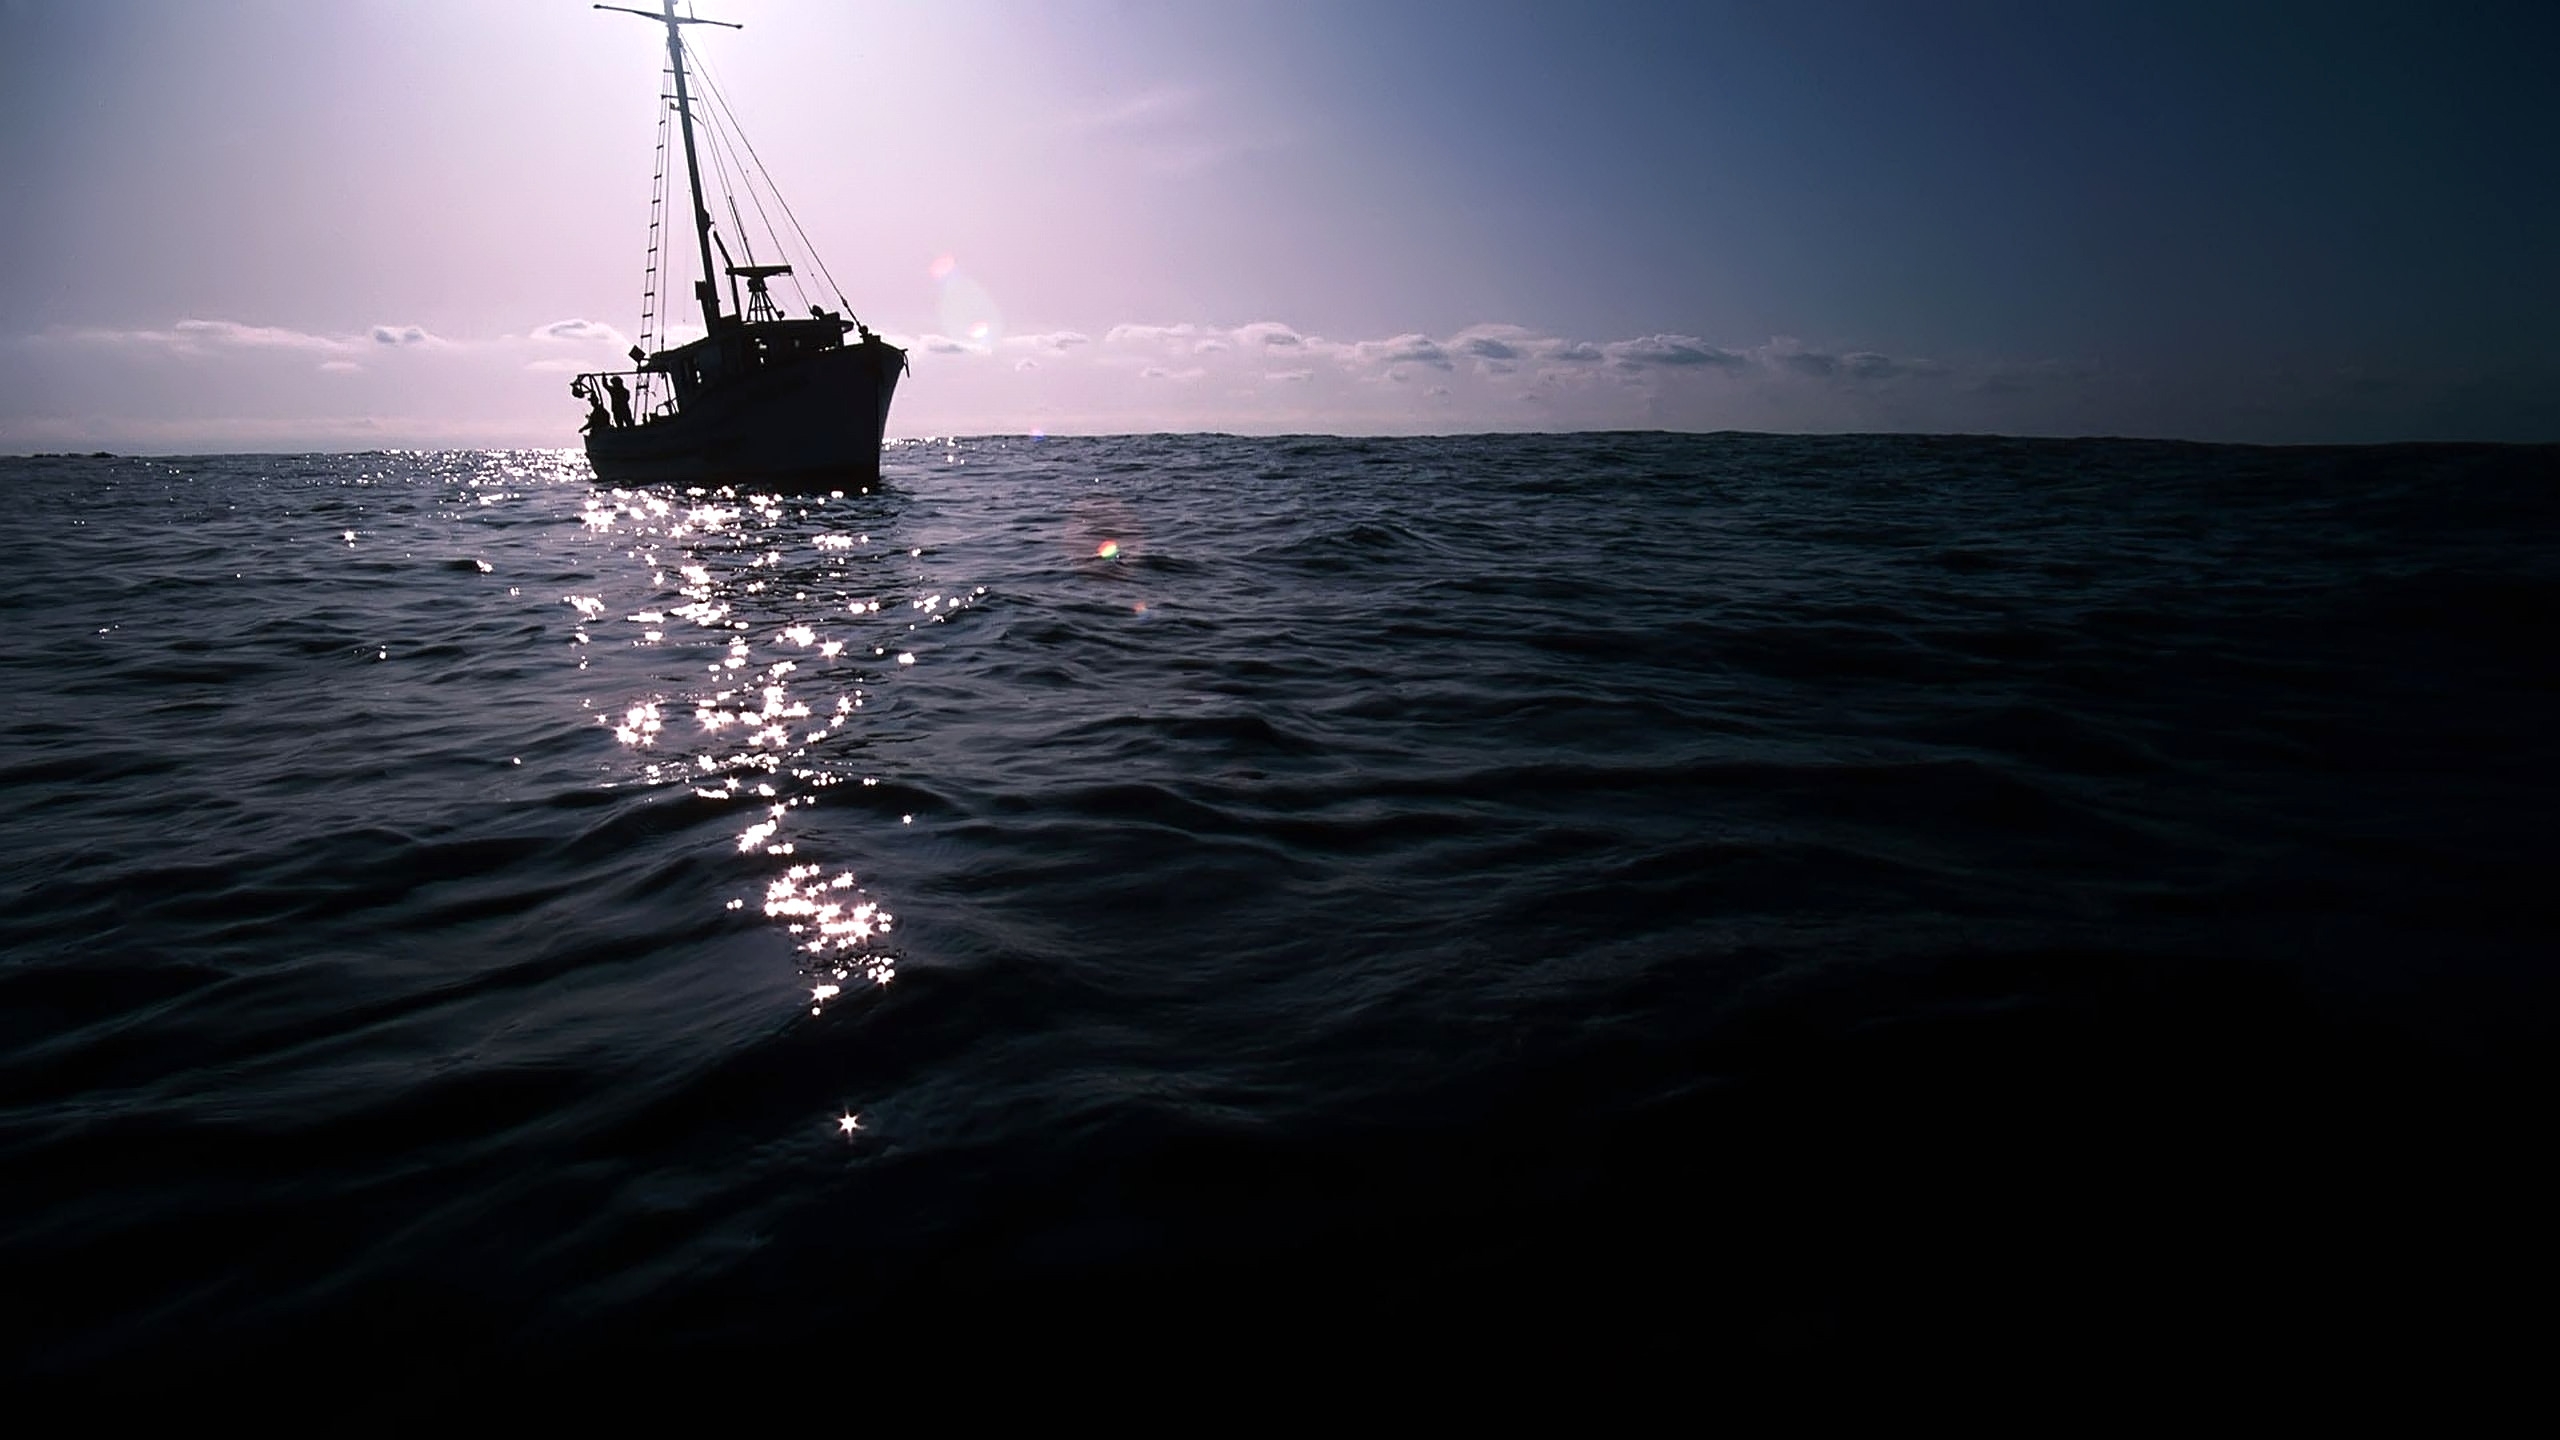 The Dark Boat on Sea for 2560x1440 HDTV resolution